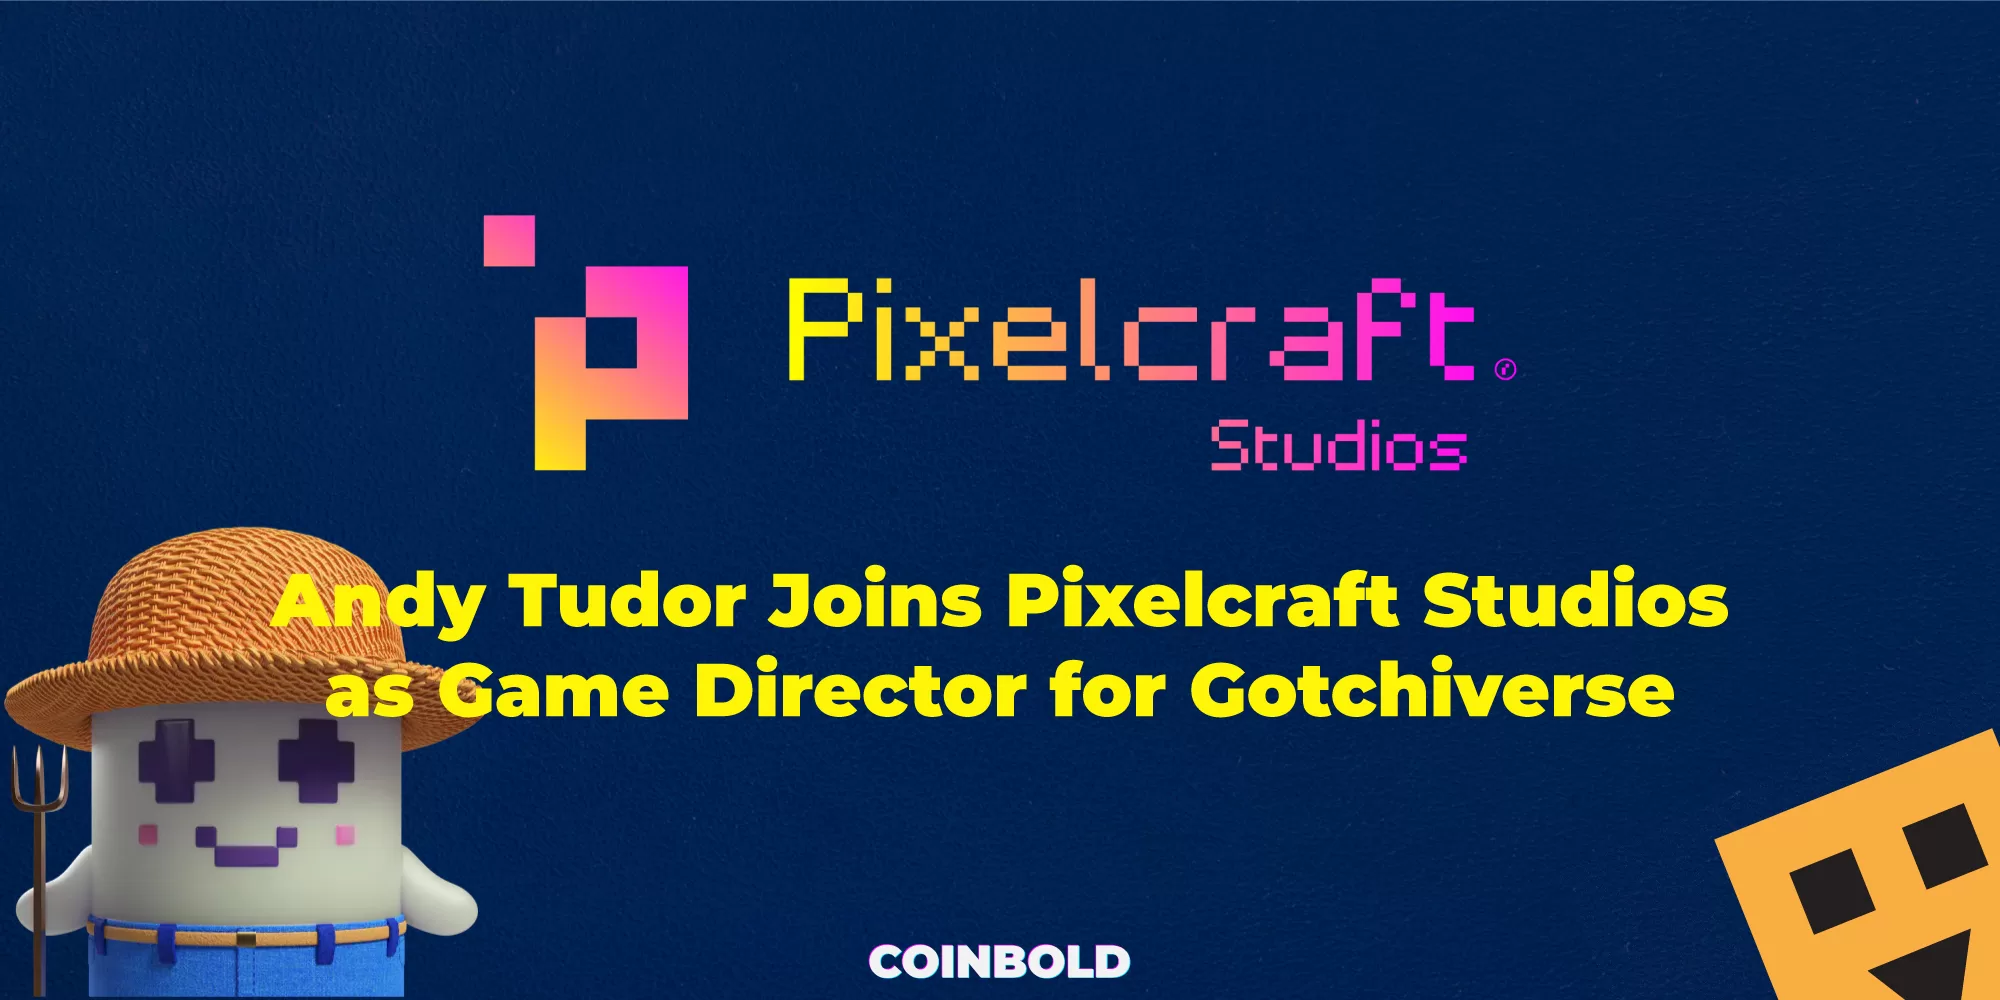 Andy Tudor Joins Pixelcraft Studios as Game Director for Gotchiverse